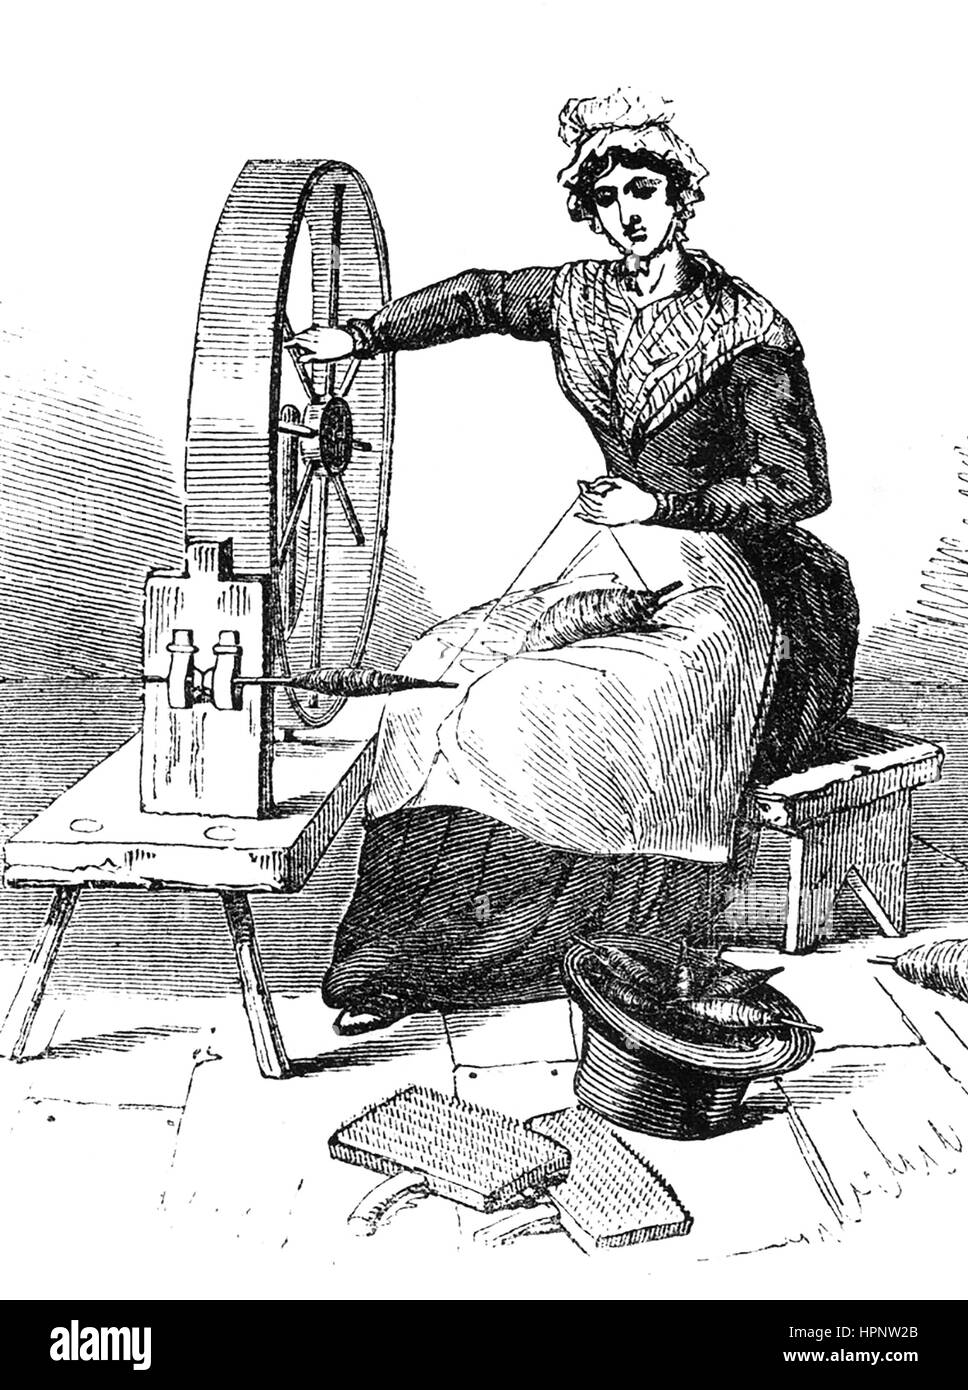 JERSEYWHEEL  used for spinning cotton and wool and replaced by the machines such as the spinning jenny during the industrial revolution. Engraving about 1800 Stock Photo